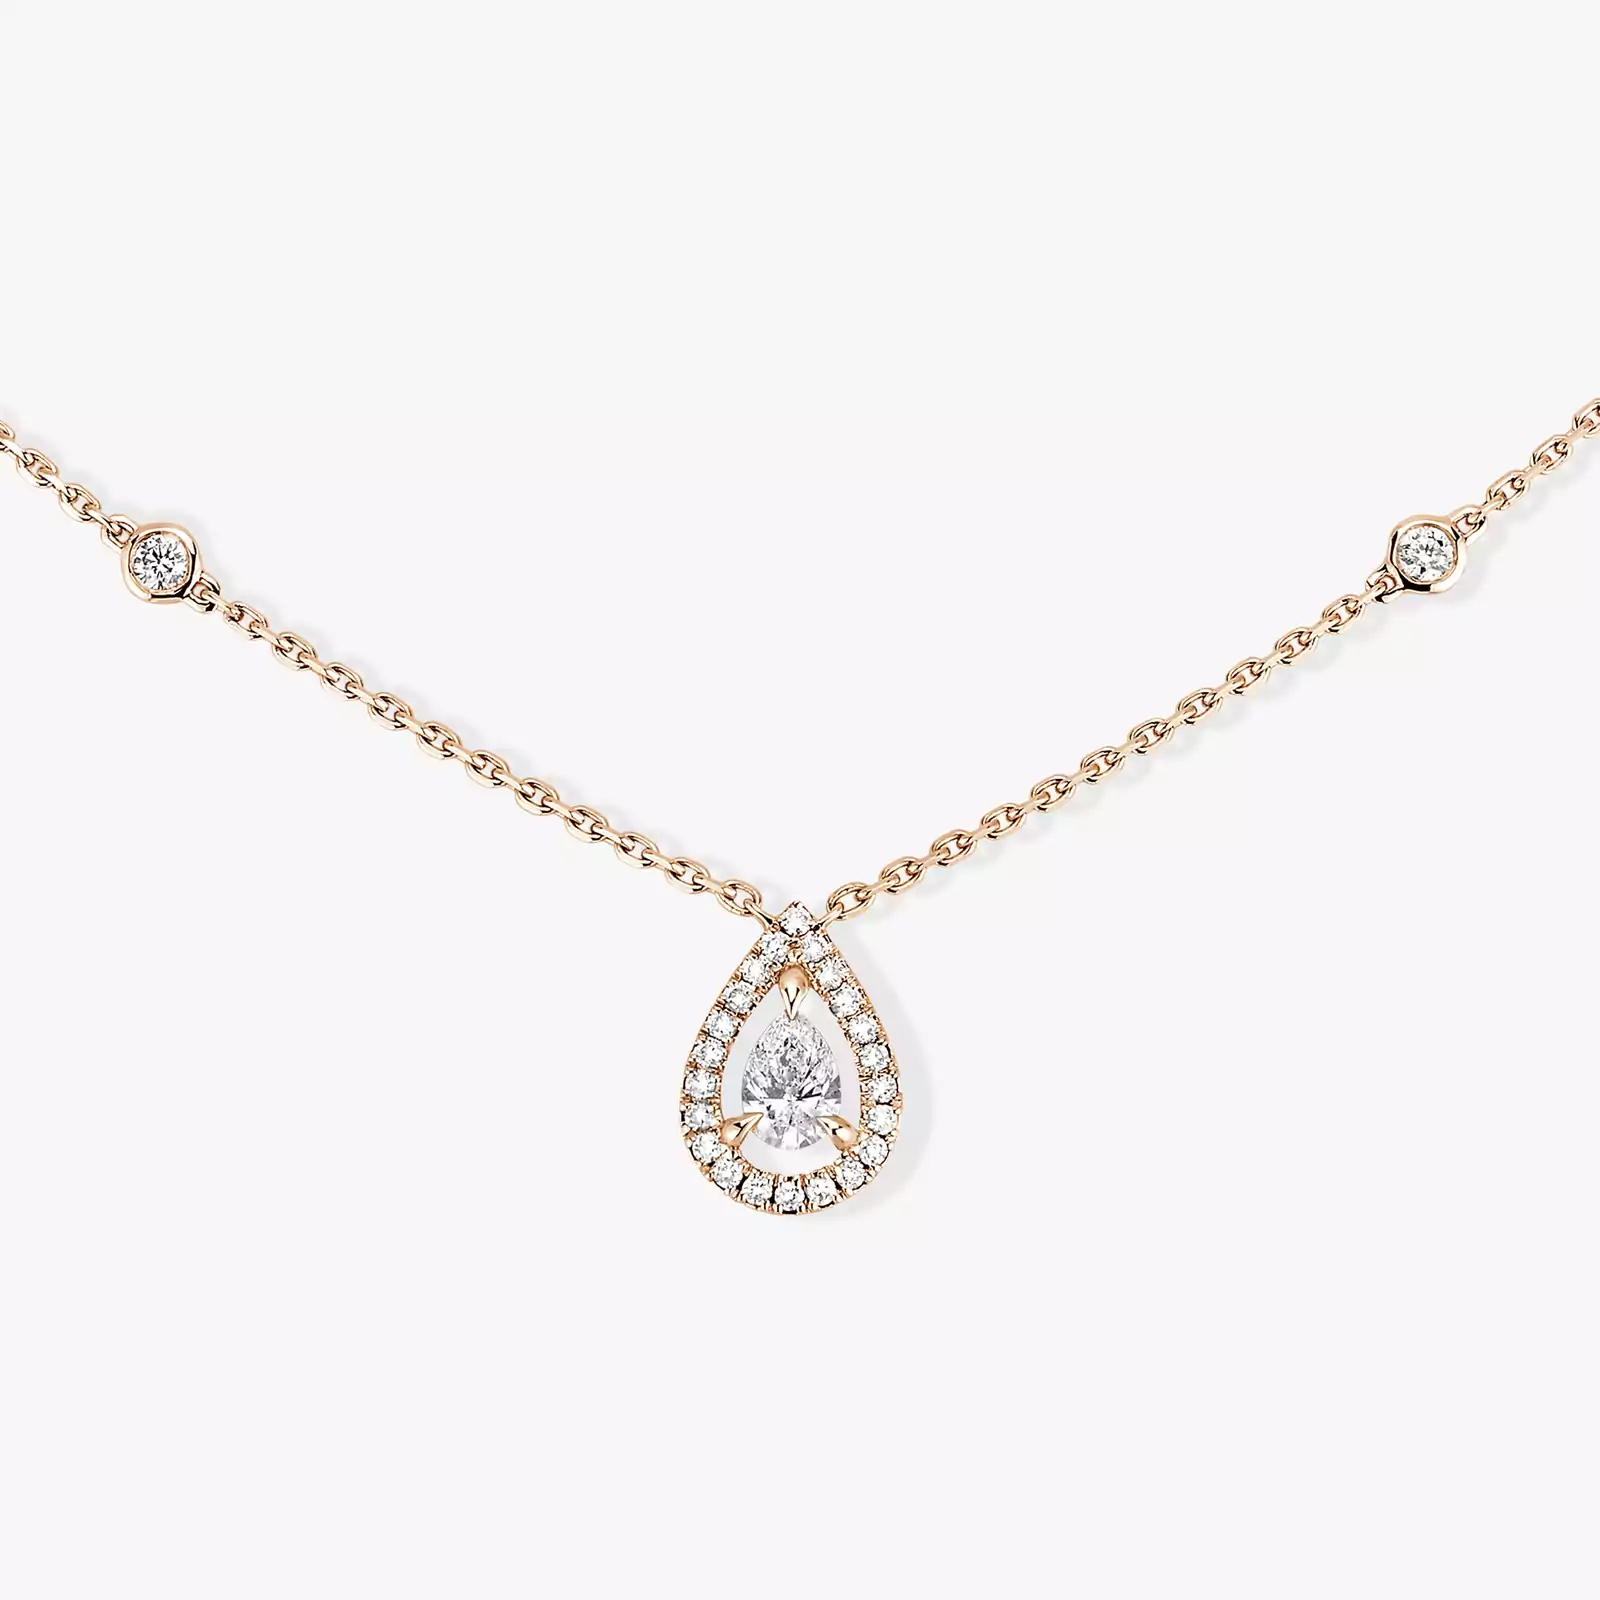 Joy Pear Diamond 0.25ct Pink Gold For Her Diamond Necklace 05224-PG